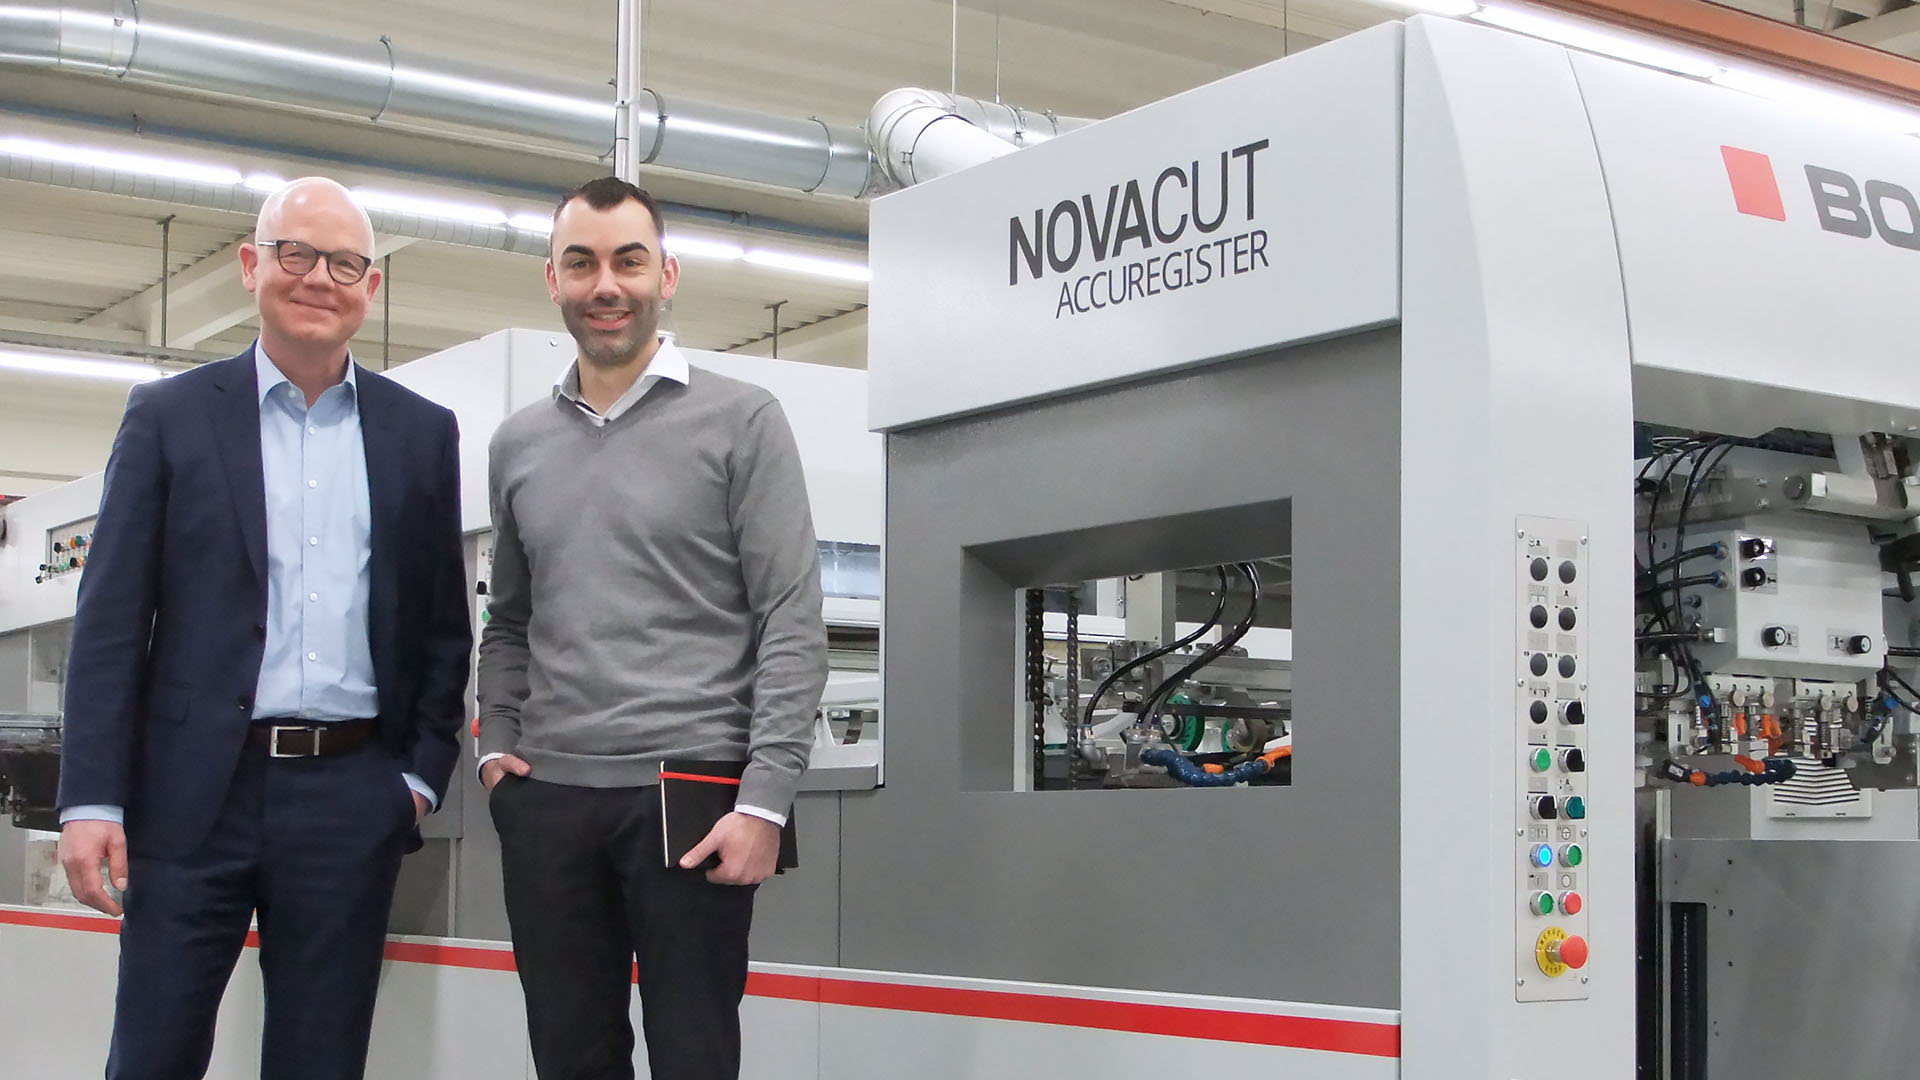 Within a few months, they have carried out successfully the beta testing of the BOBST NOVACUT 106 ER flat-bed die-cutter with the new ACCUREGISTER “contactless” sheet-feeding: ​ Höhn Display + Packaging Operations manager Markus Laepple (right) and Hans Dreistein (Bobst Meerbusch).